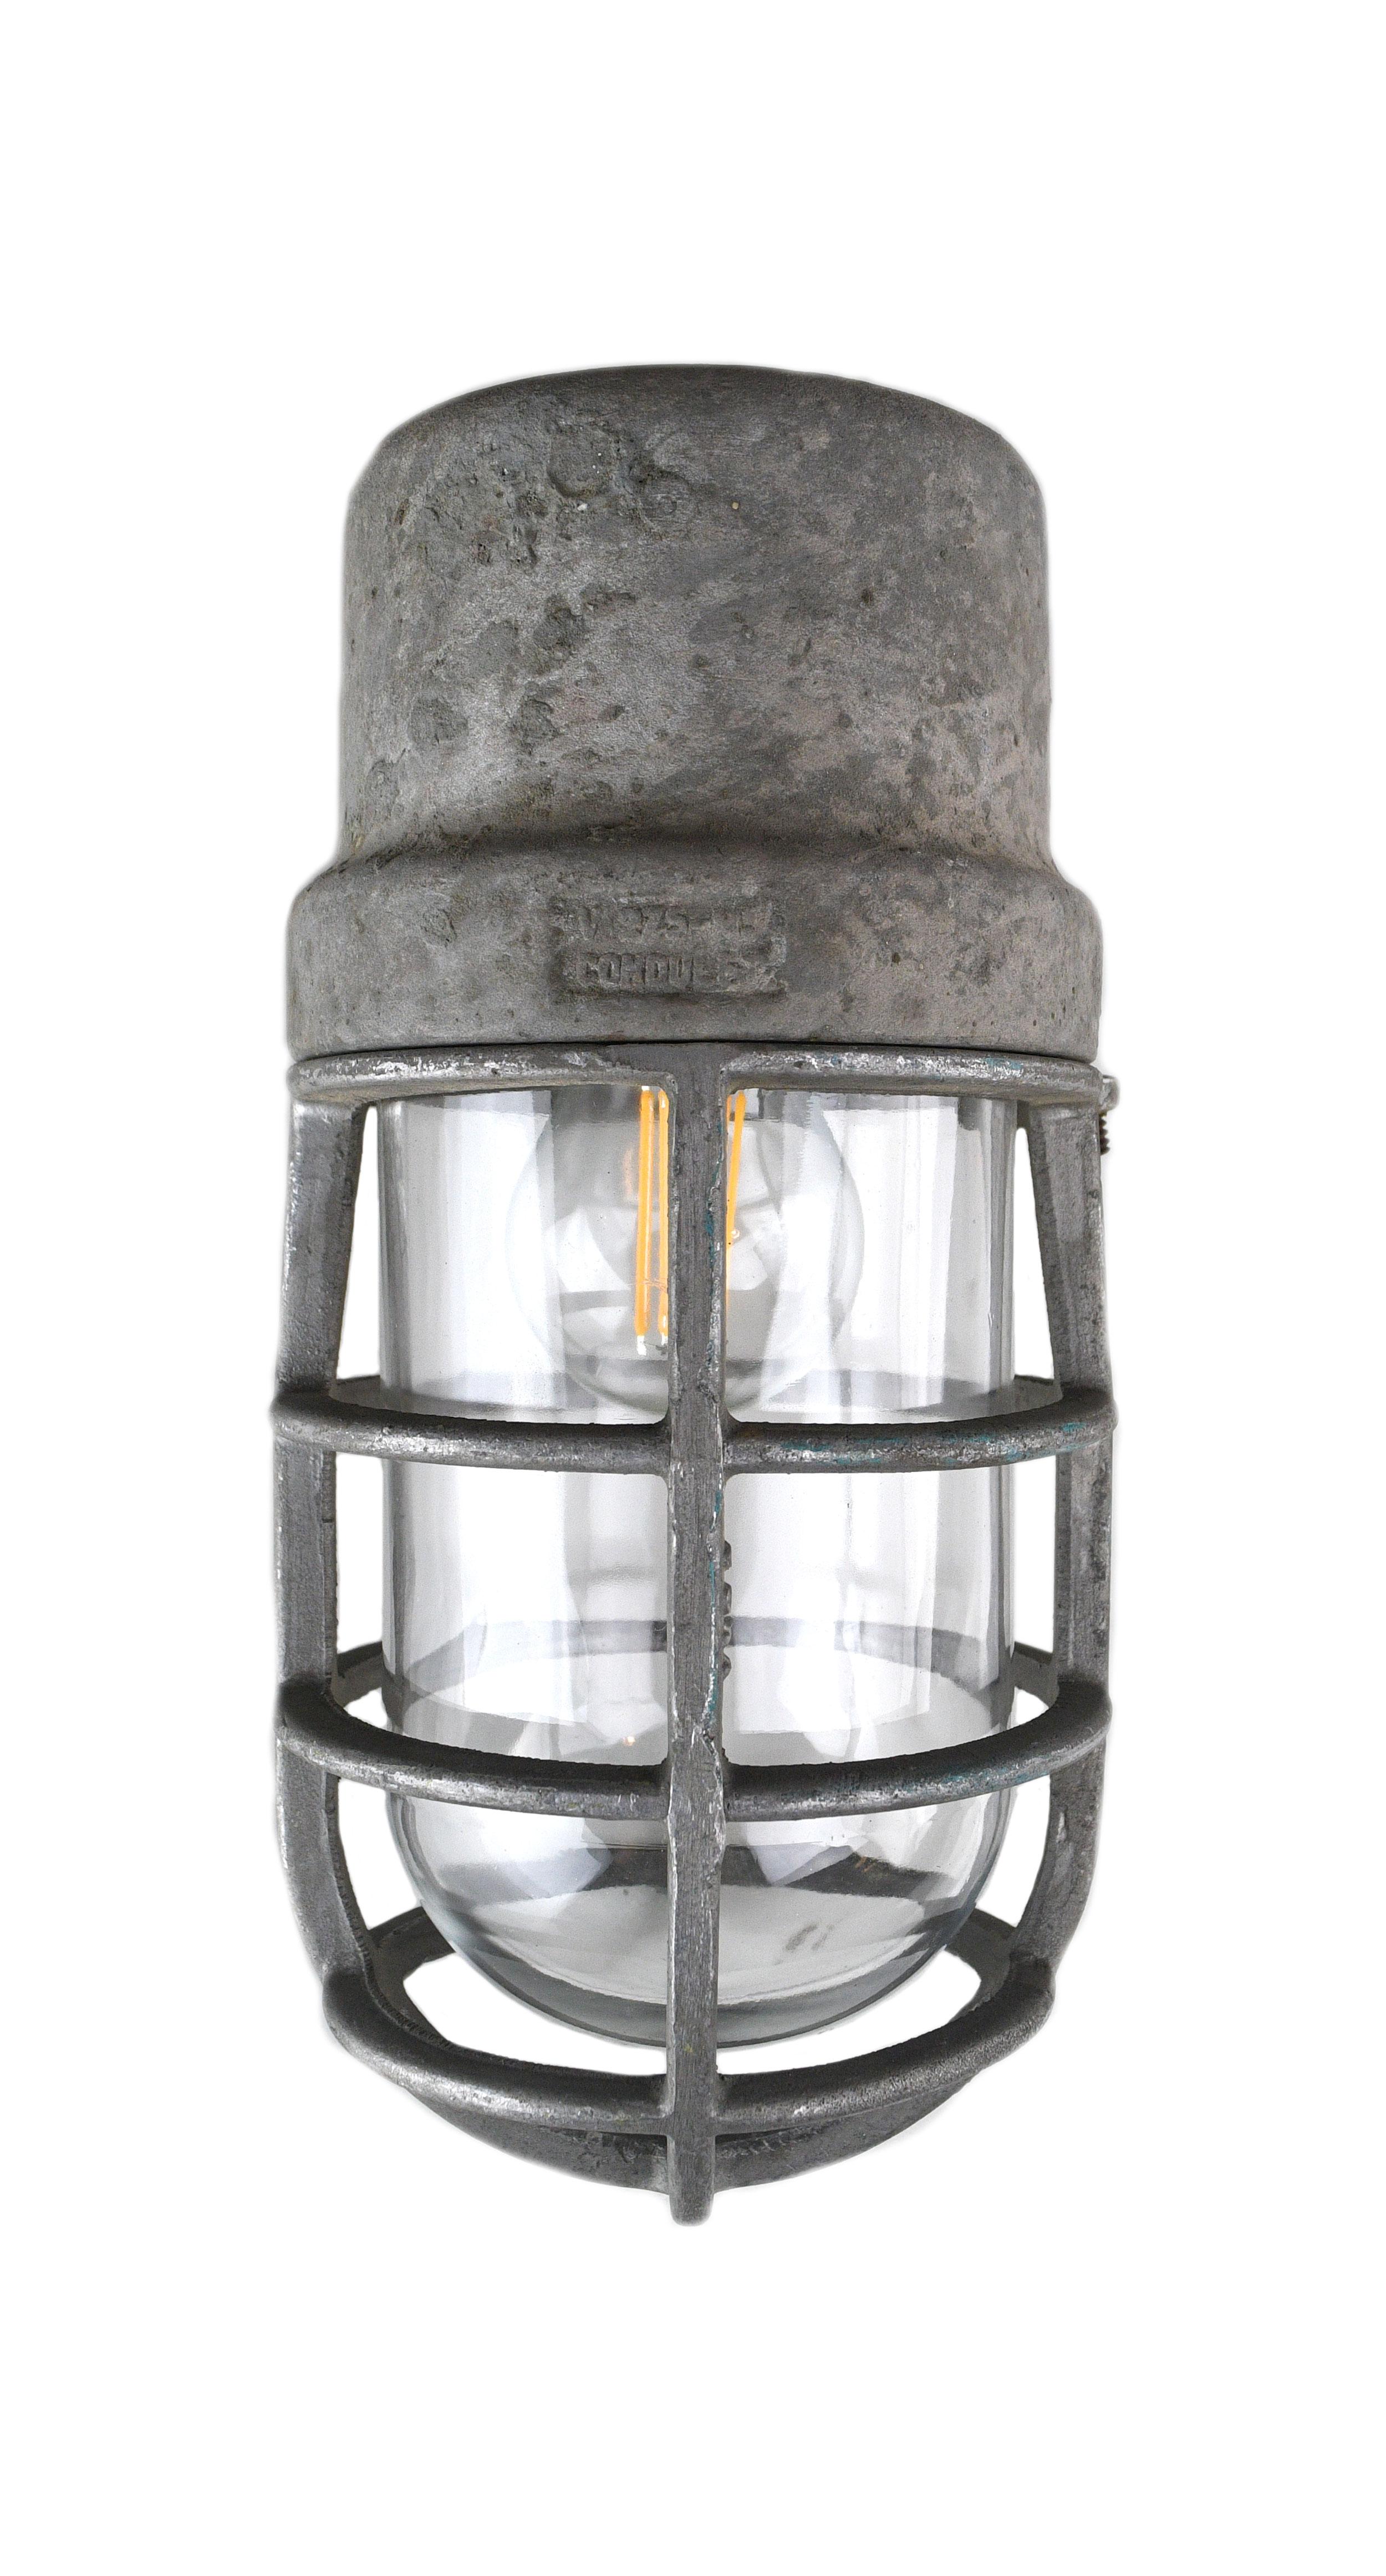 These Crouse Hinds sconces are made of metal and cast aluminum feature a Classic Industrial Design. 

Crouse-Hinds Electric Company, a manufacturer of high grade electrical specialties, was established in 1897 in Syracuse, New York. They later